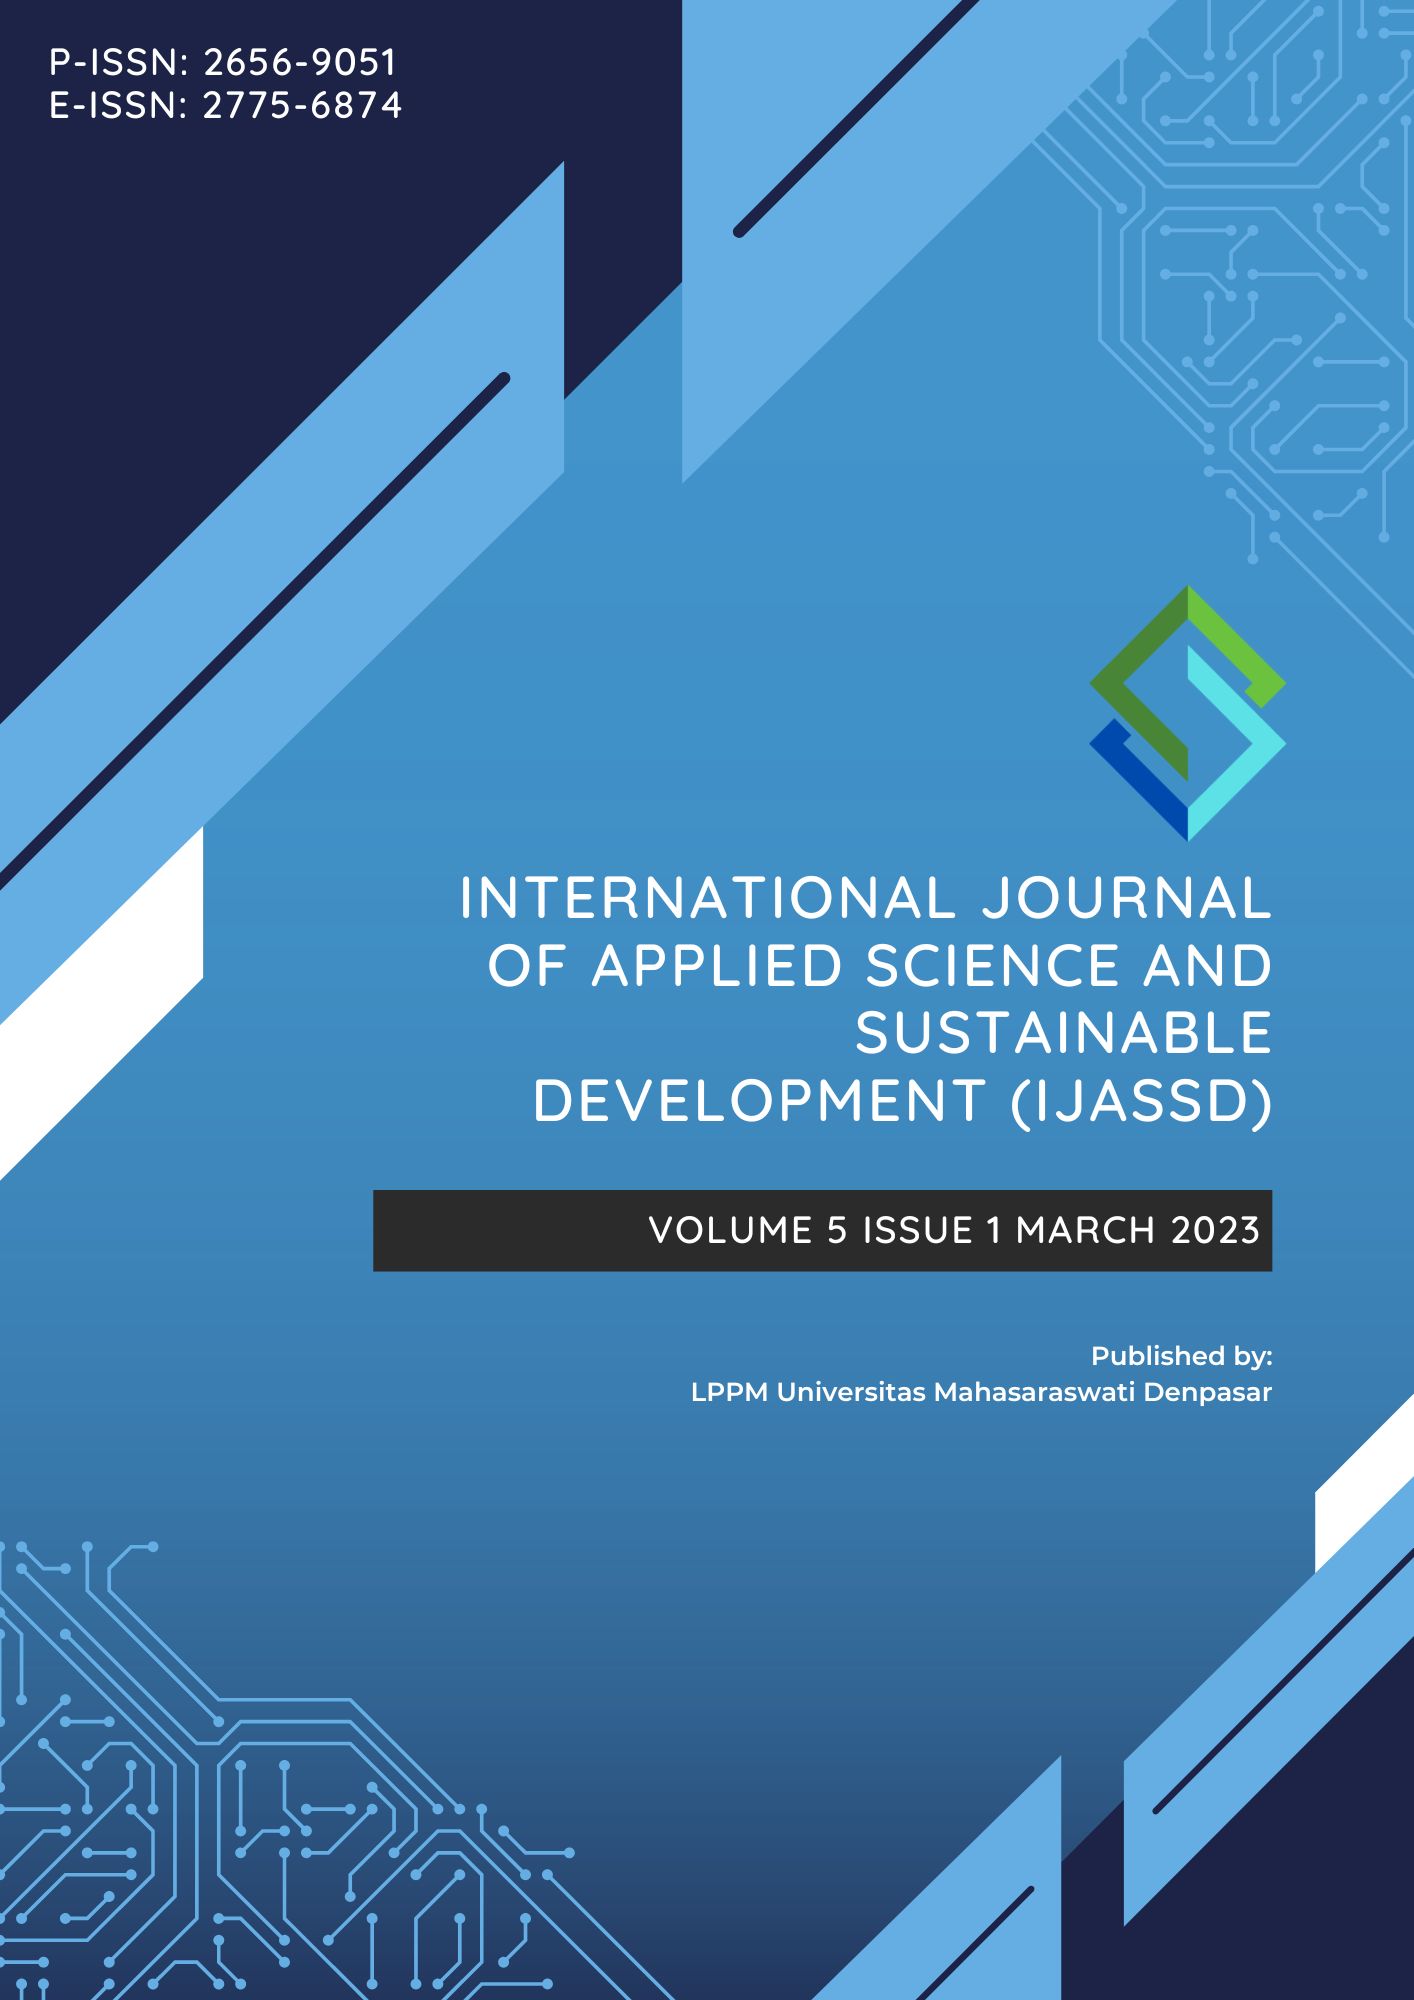 					View Vol. 5 No. 1 (2023): International Journal of Applied Science and Sustainable Development (IJASSD)
				